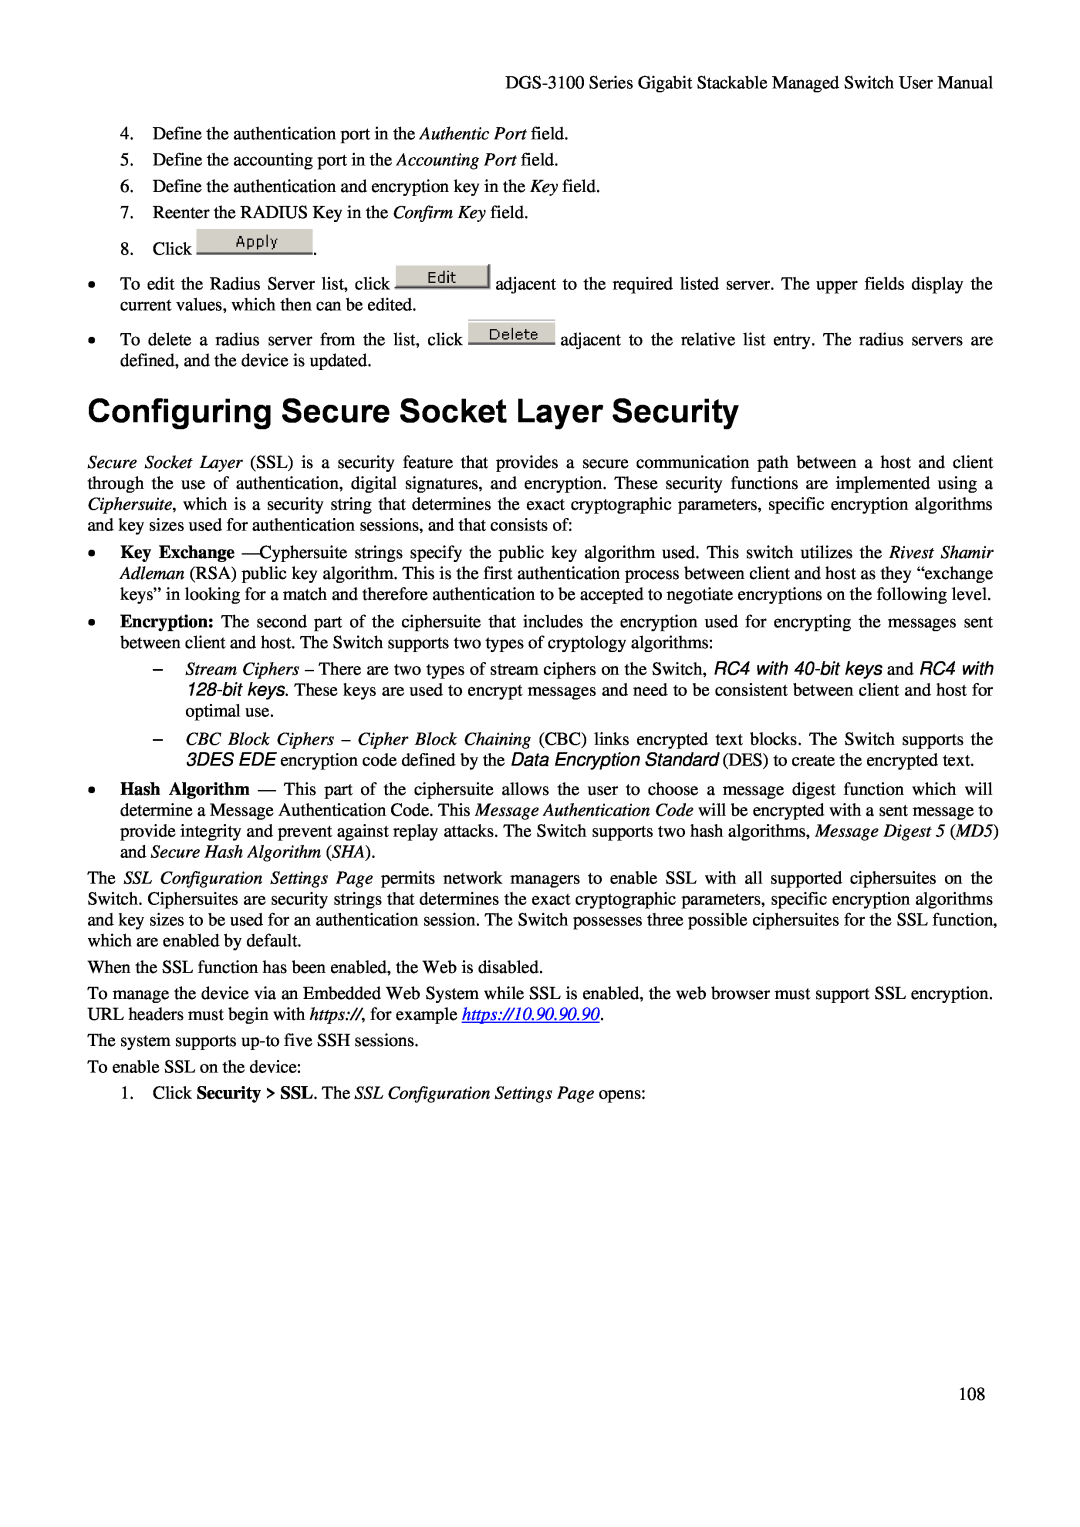 D-Link DGS-3100 Configuring Secure Socket Layer Security, Click Security SSL. The SSL Configuration Settings Page opens 